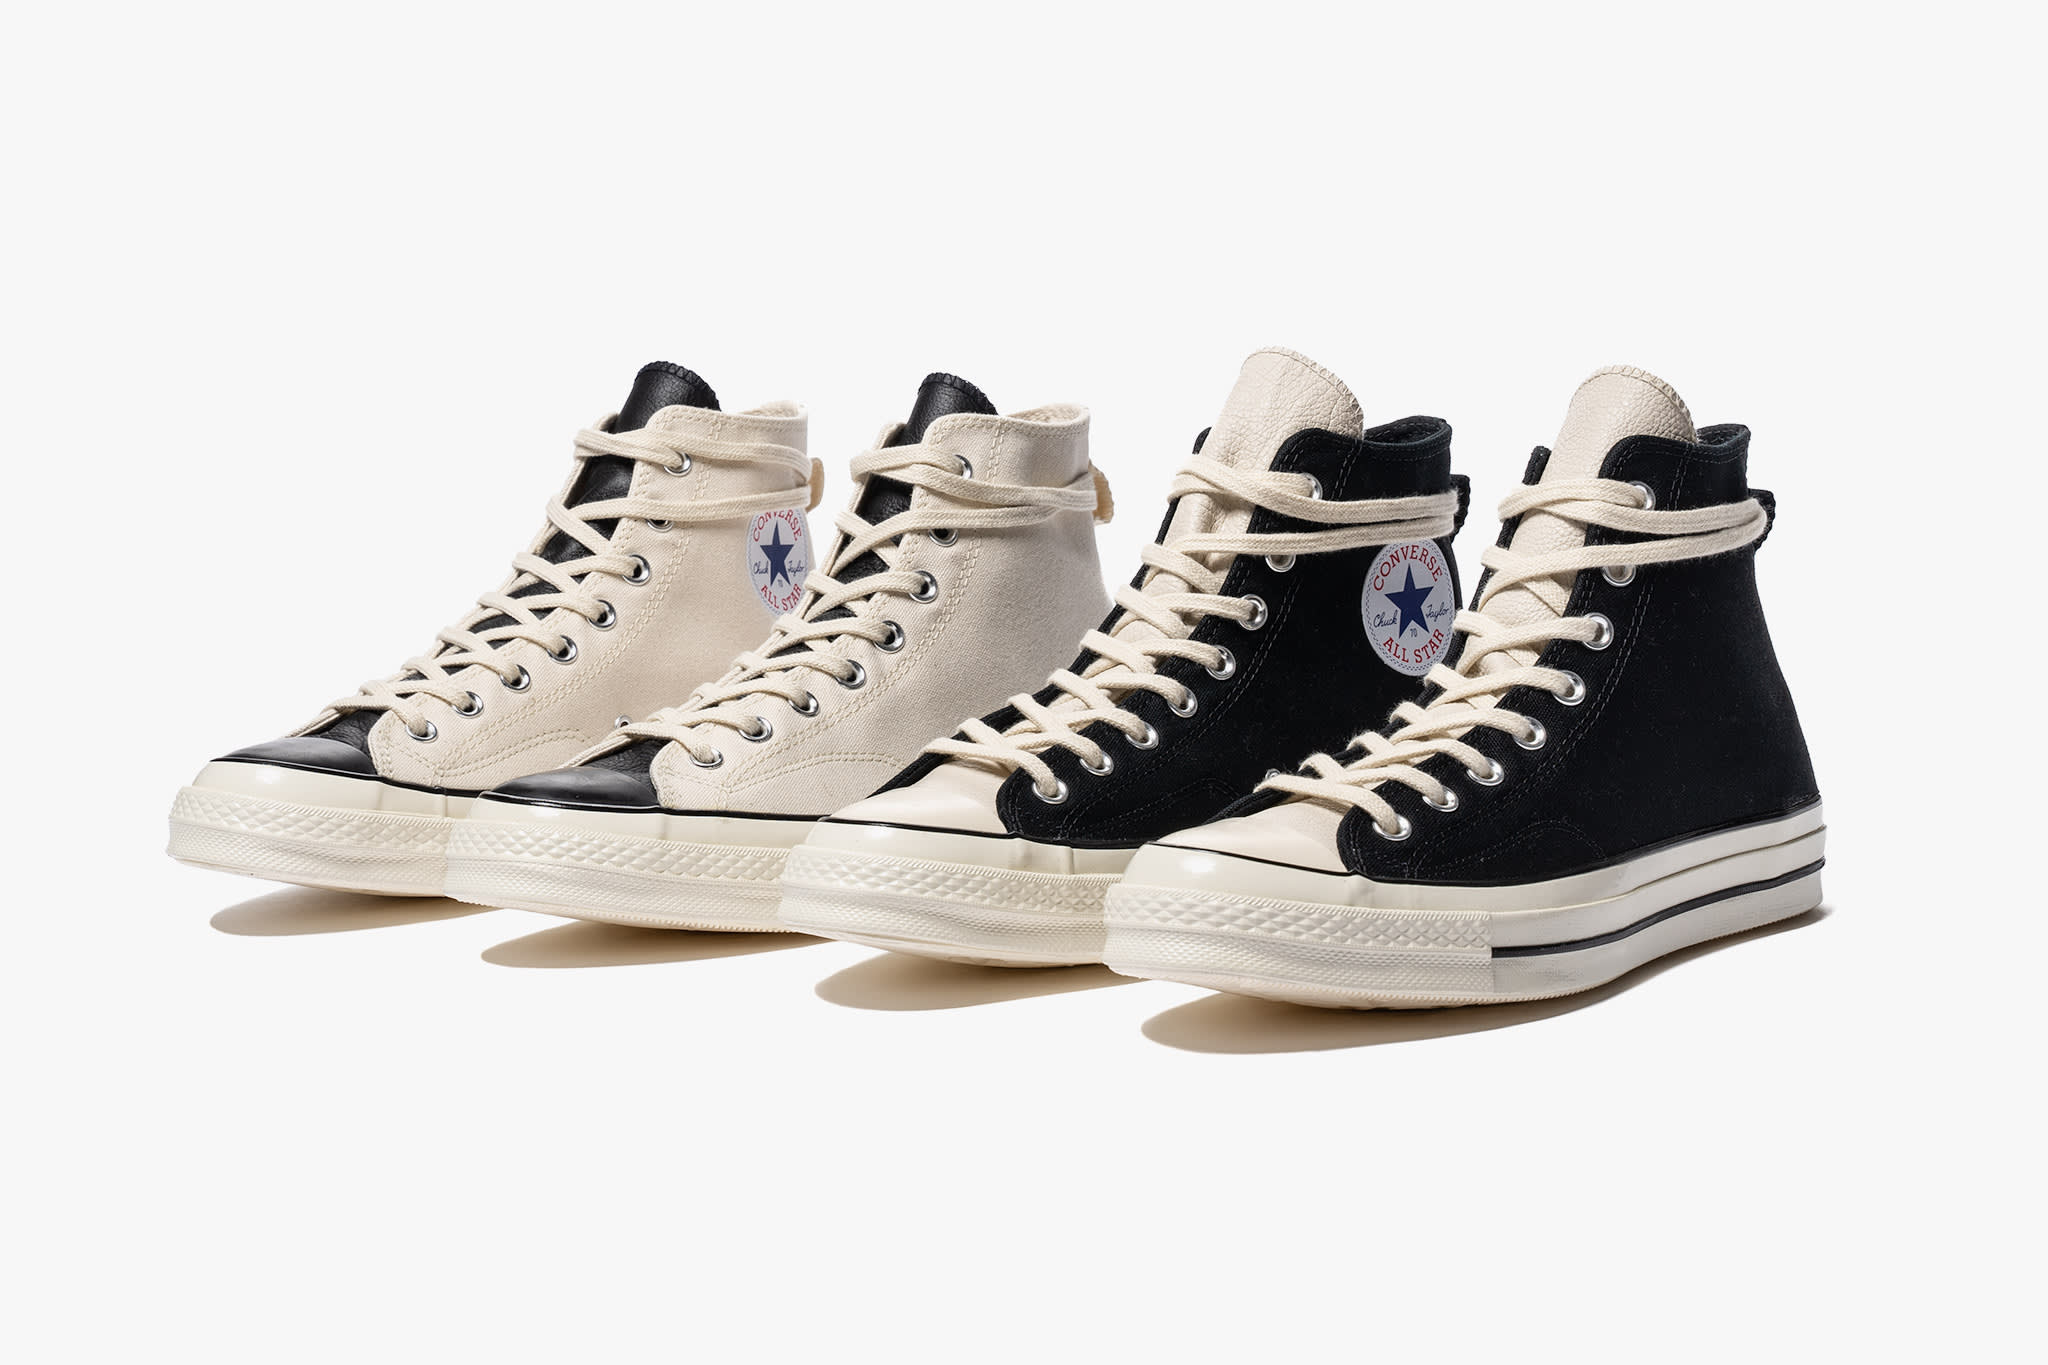 converse fear of god stockx